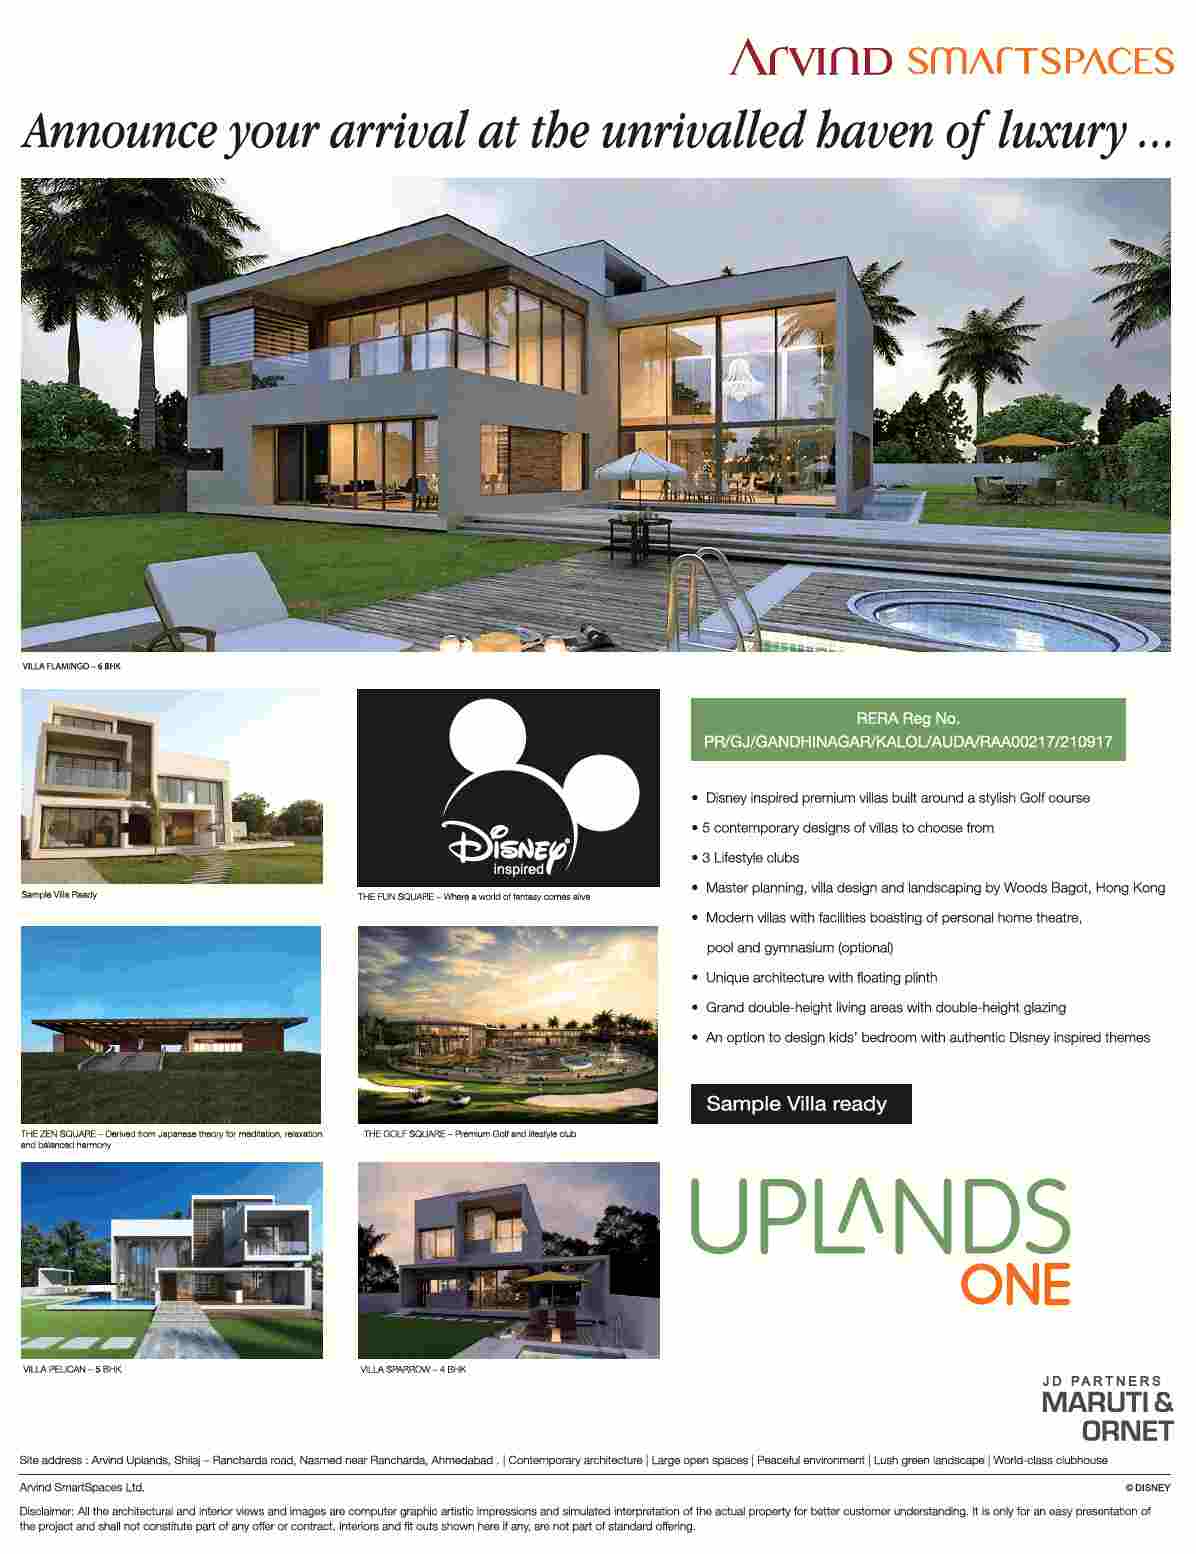 Announce your arrival at the unrivaled haven of luxury at Arvind Uplands in Ahmedabad